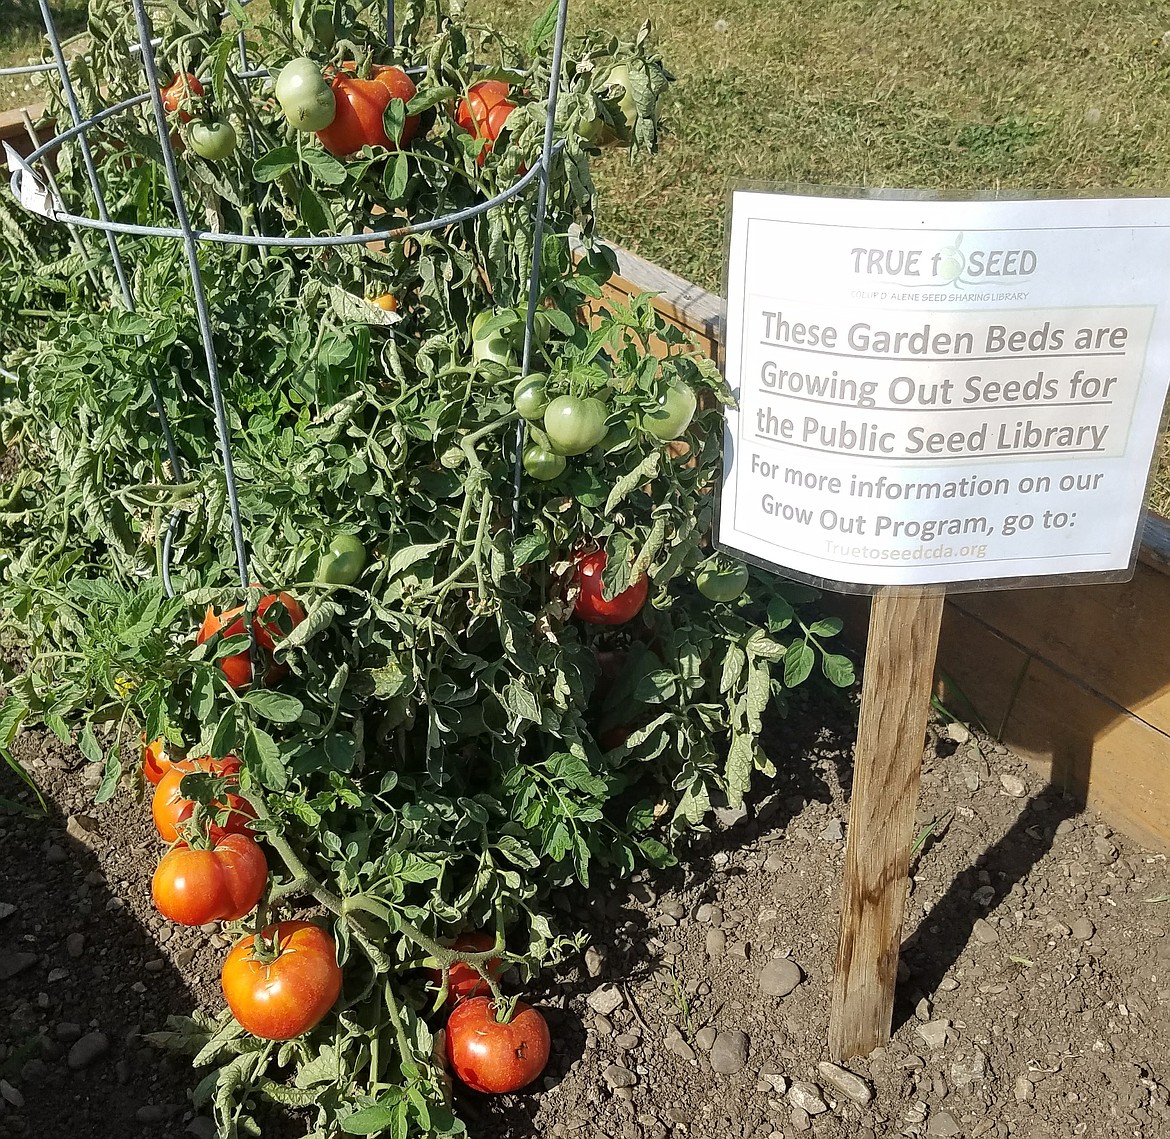 Seed from these "Sasha’s Altai" tomatoes grown by Idaho Master Gardeners will be donated to the True to Seed seed library.